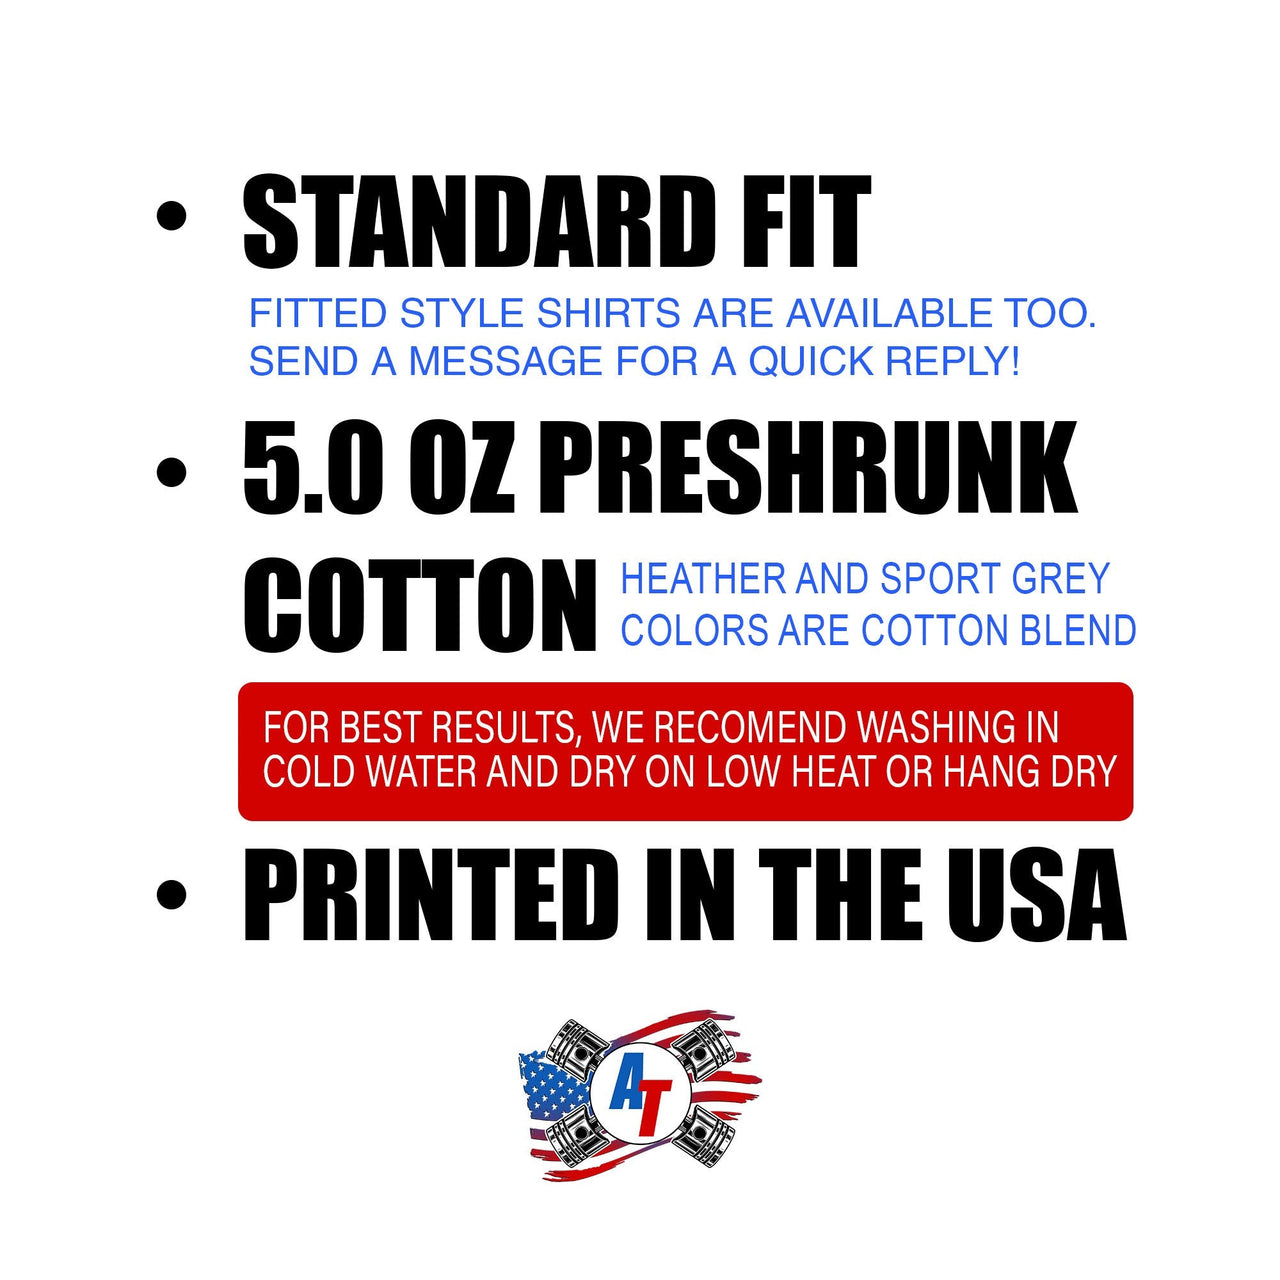 Square Body Life T-Shirt information